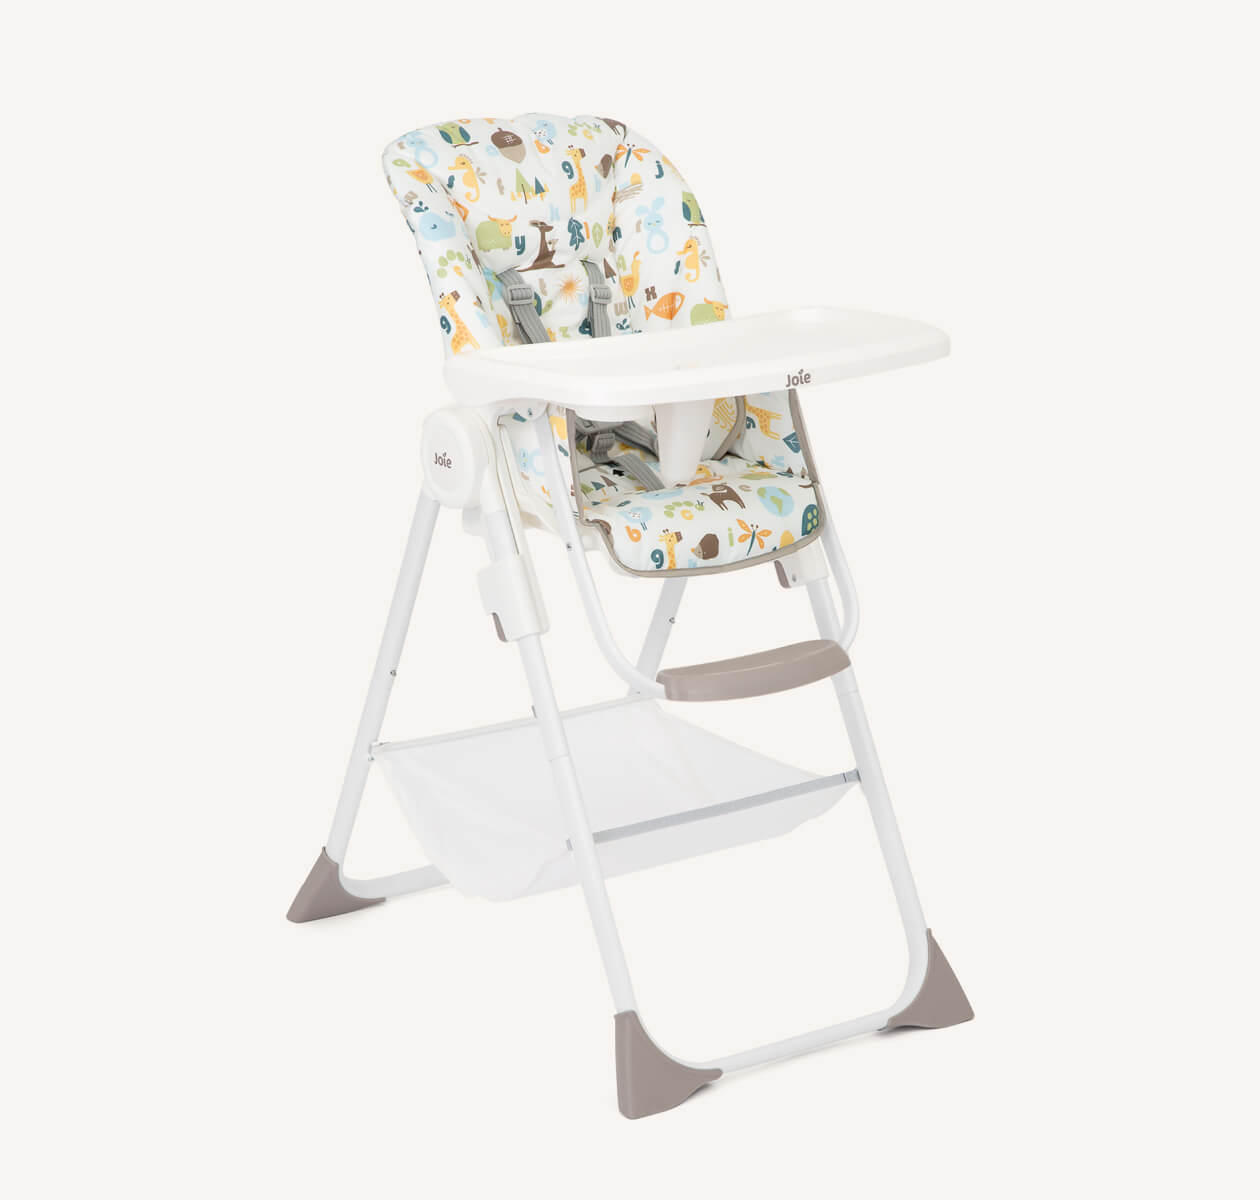 The Joie highchair Snacker 2in1 in a multi-color print featuring woodland animals and plants from a right angle. 